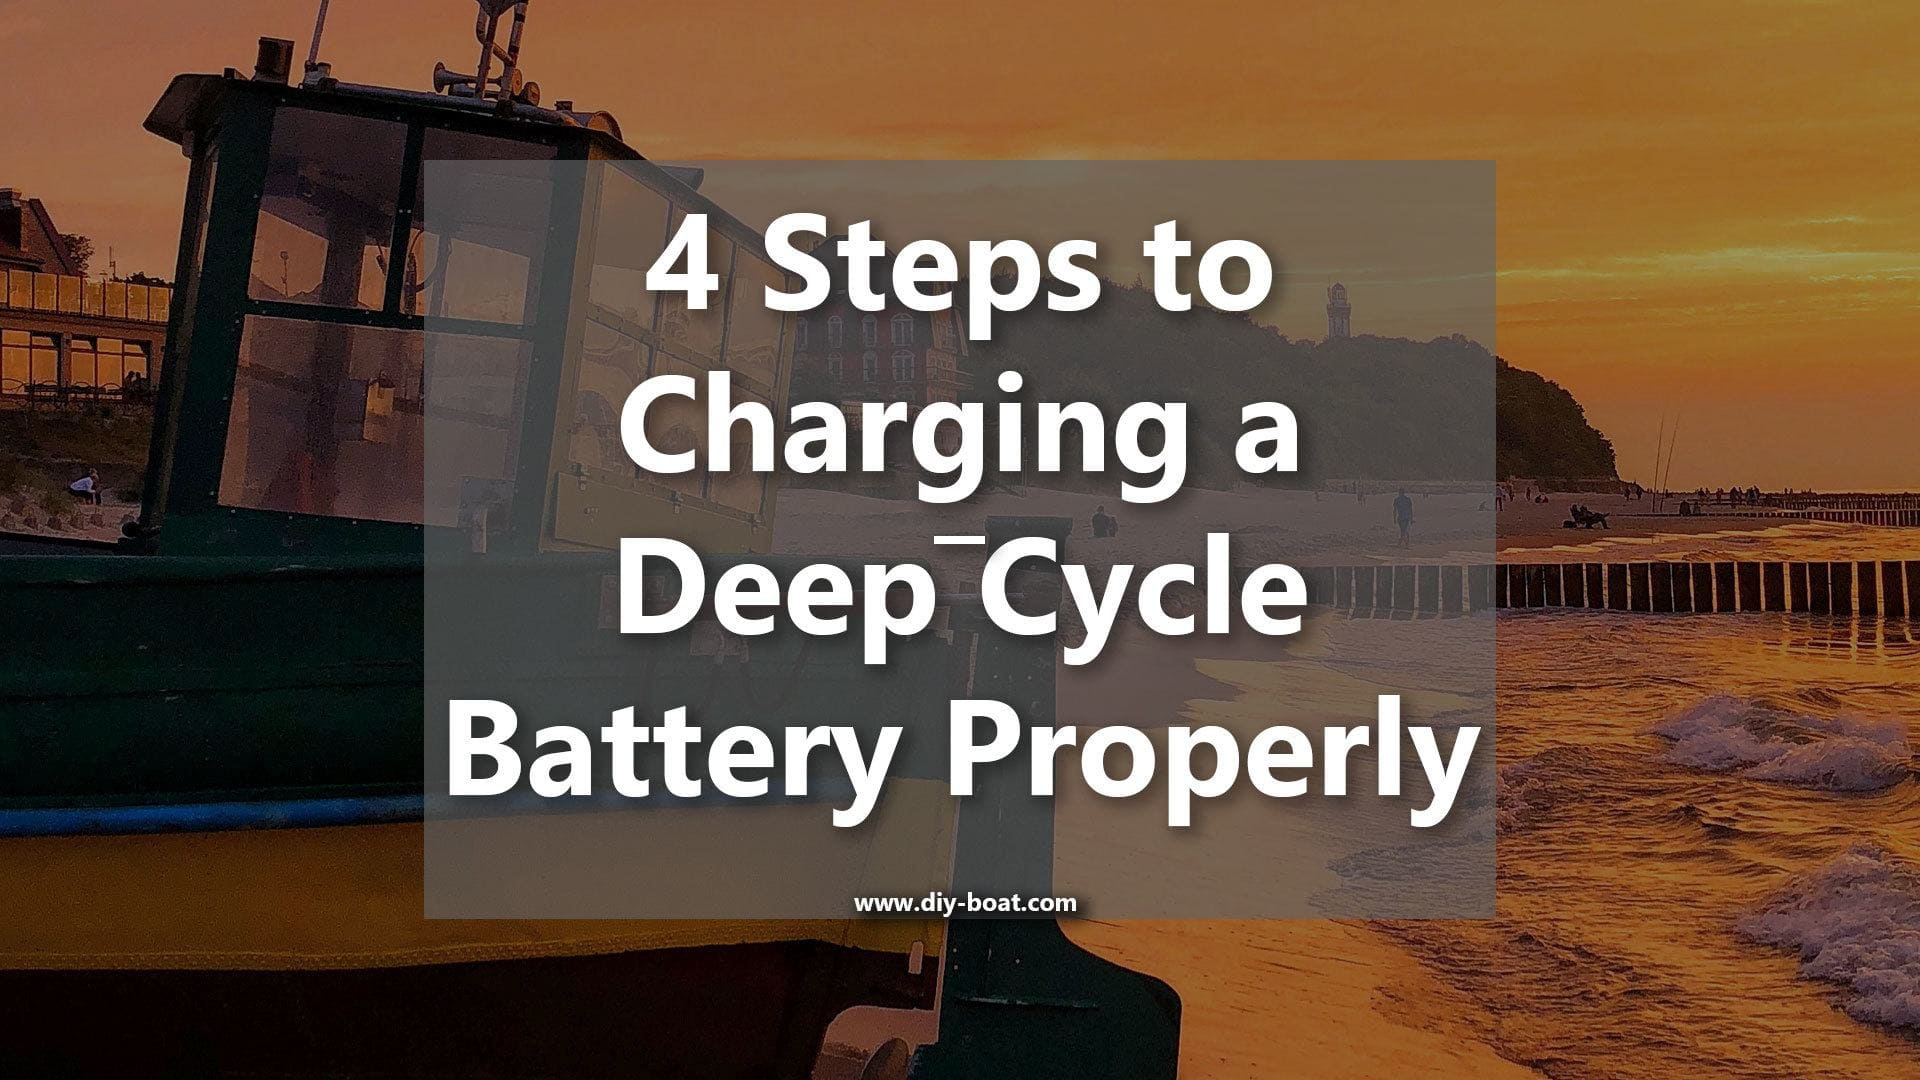 How to charge a deep cycle battery properly